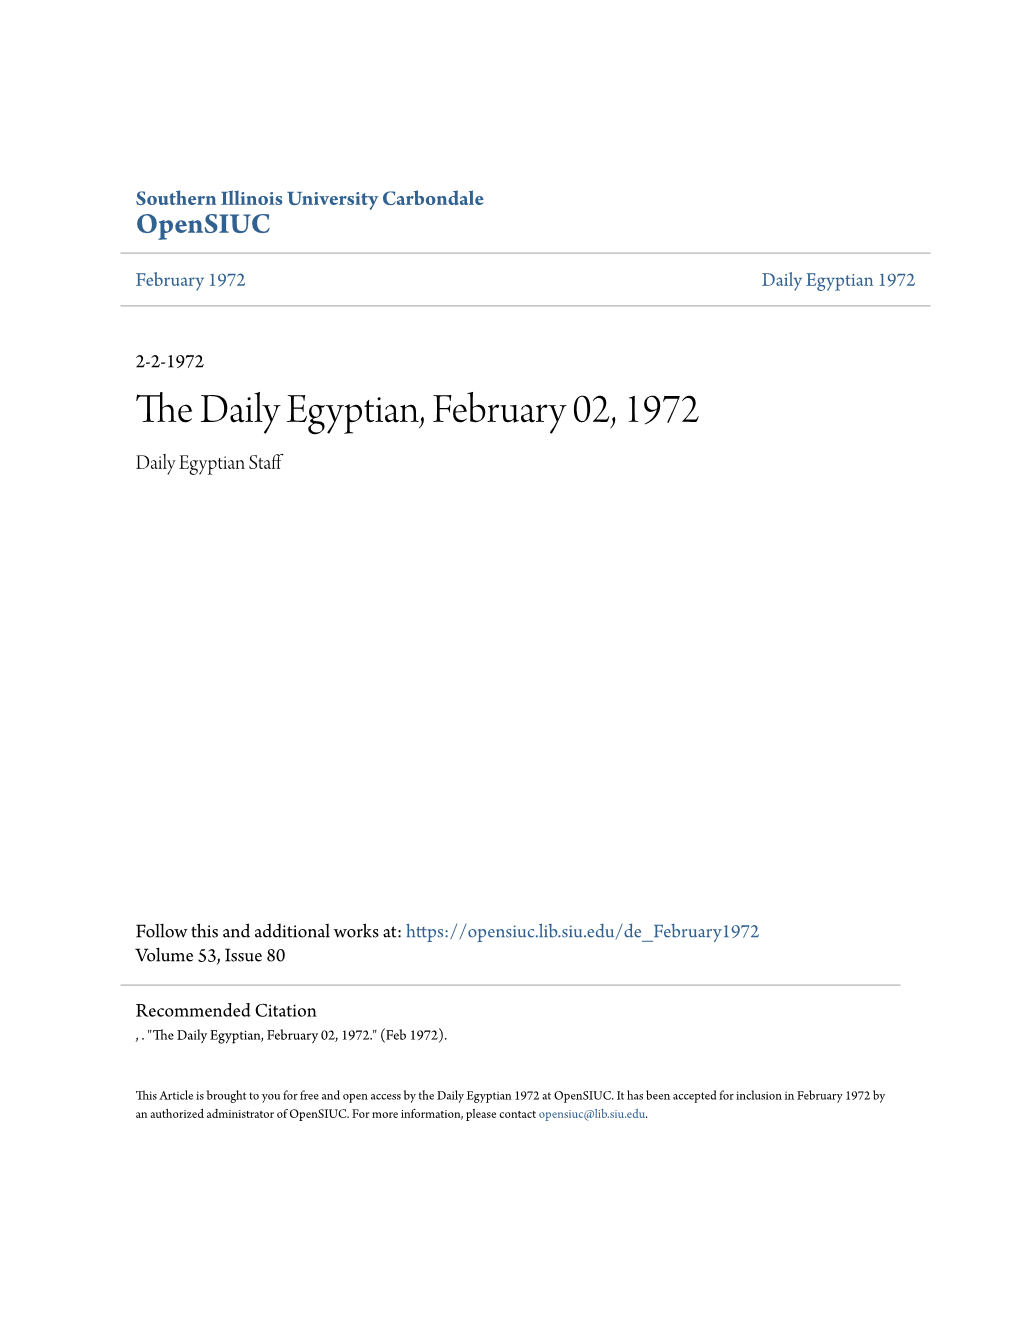 The Daily Egyptian, February 02, 1972